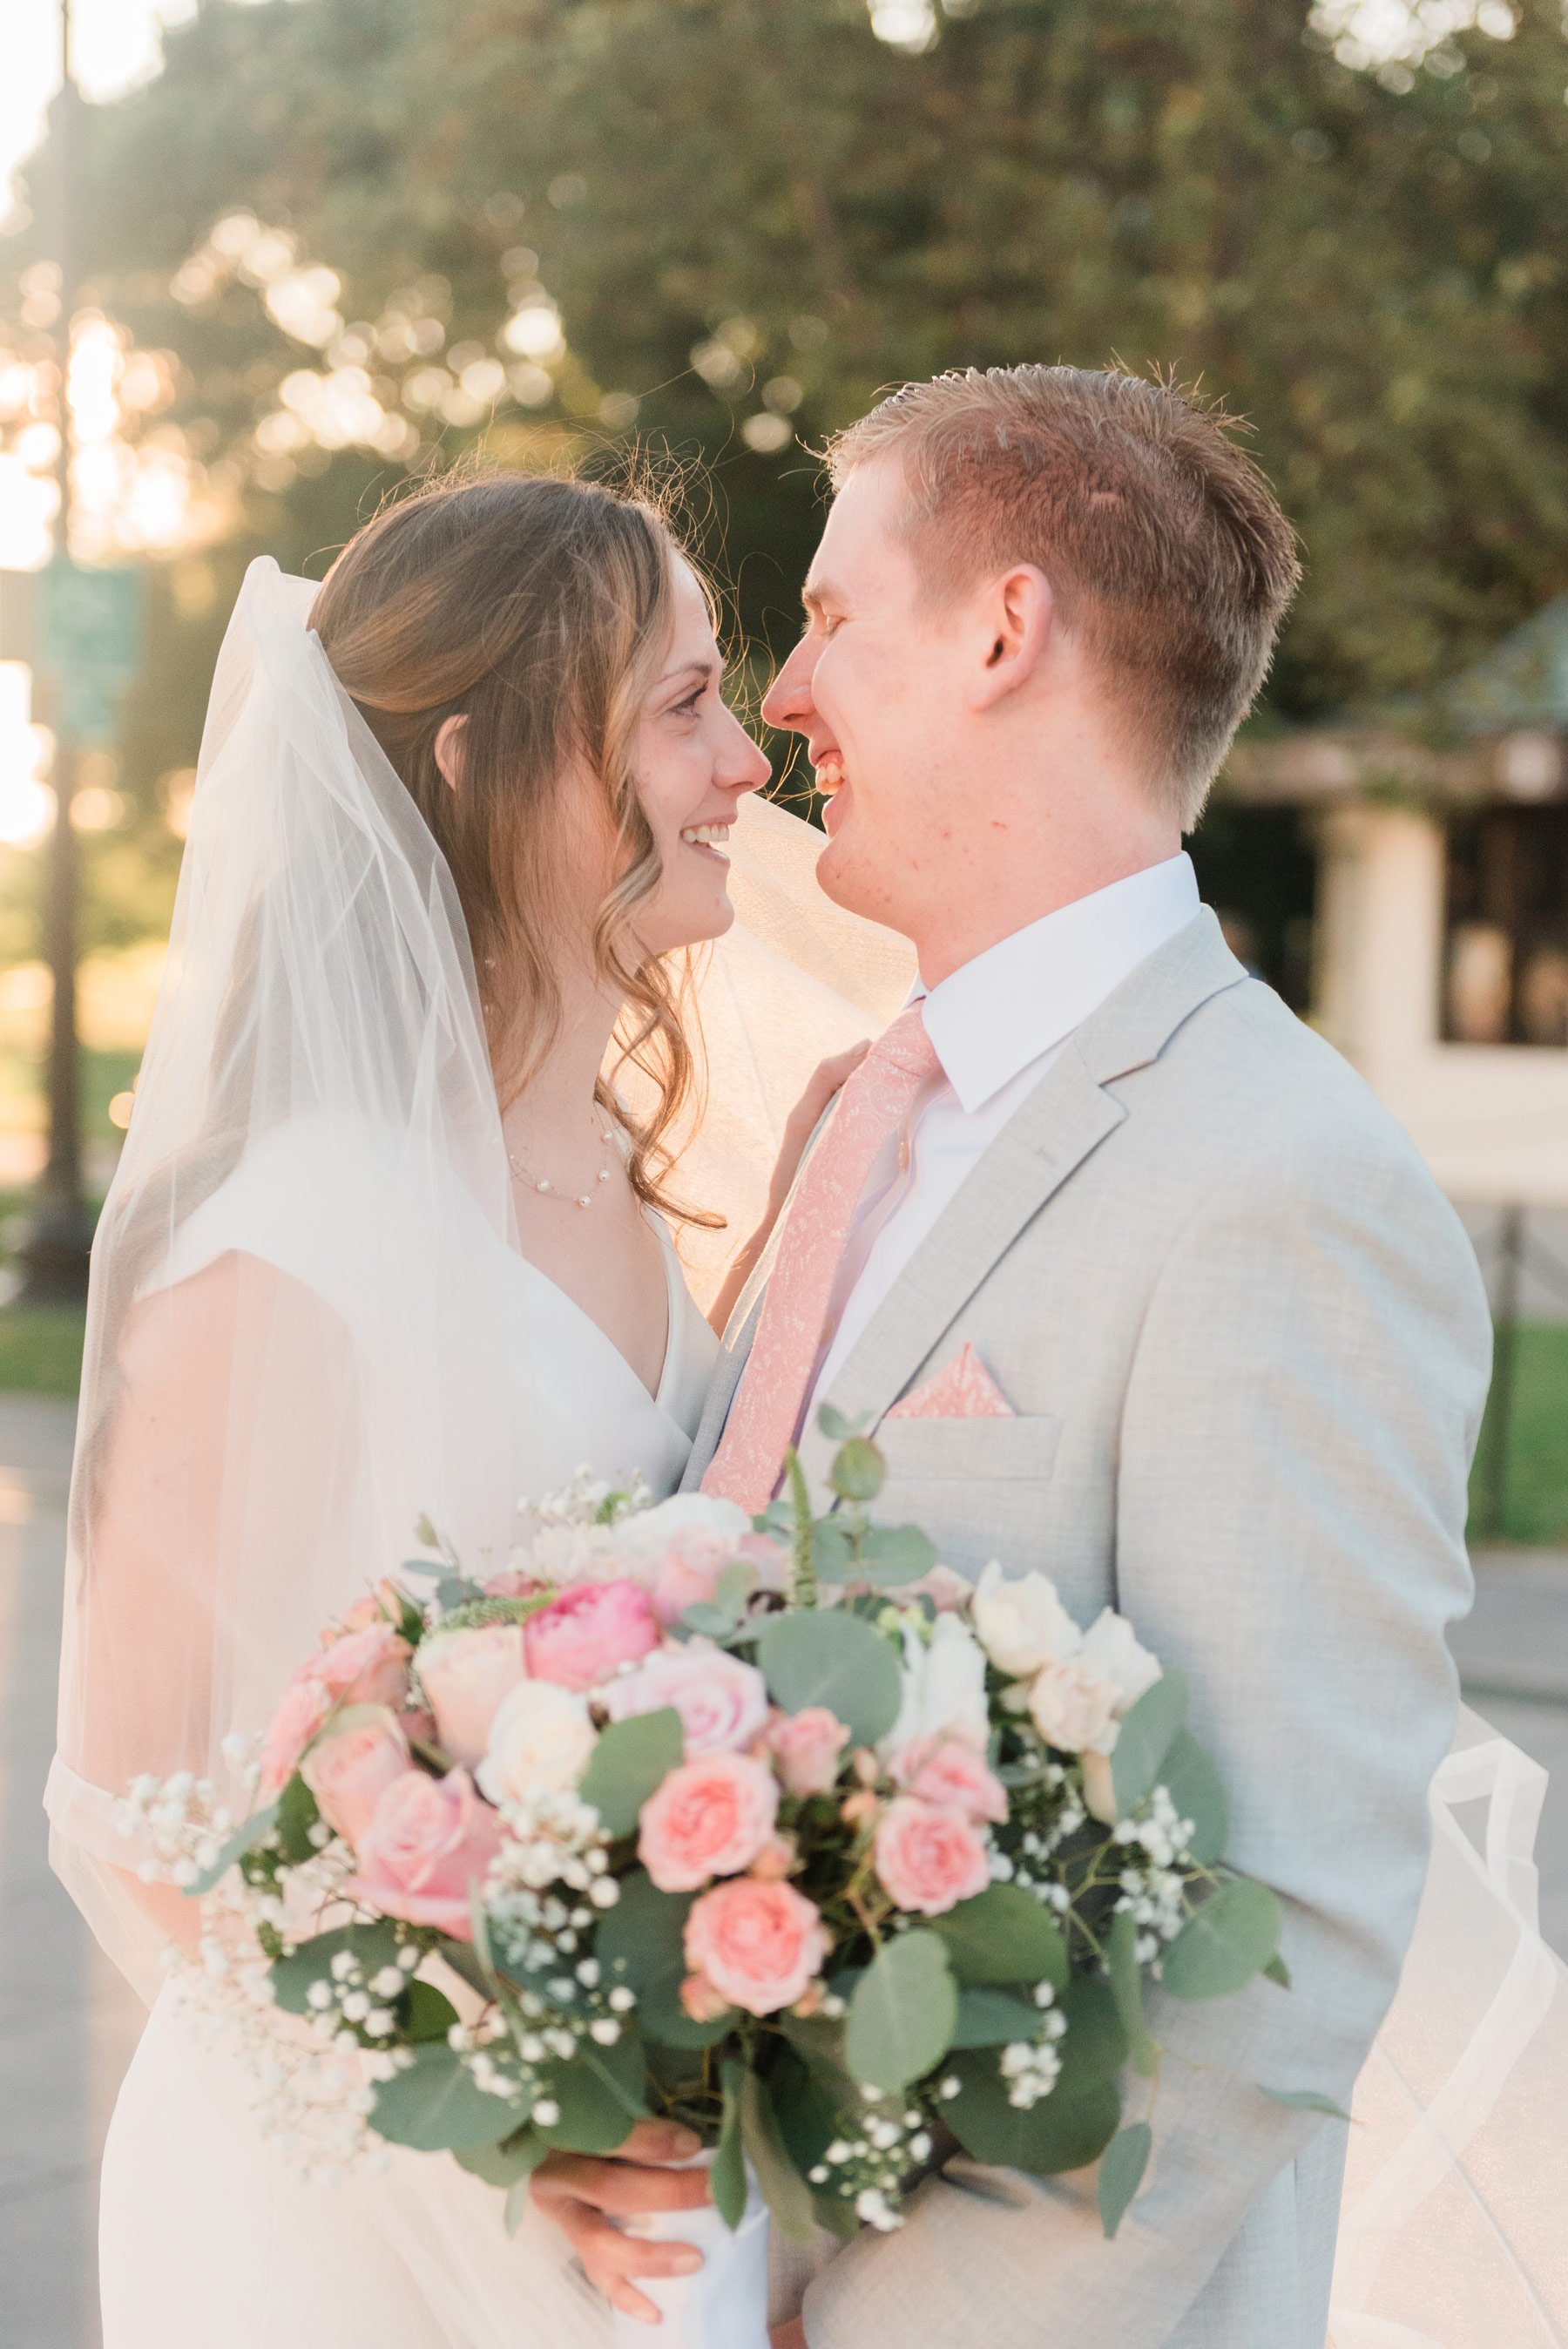    The Washington DC bride and groom smile at each other holder her pink rose bouquet. #washingtondcphotography #washingtondctemple #washingtondcwedding #dcweddingphotographer #washingtondctemplewedding #eastcoastweddingphotographer #sunsetbridals #m